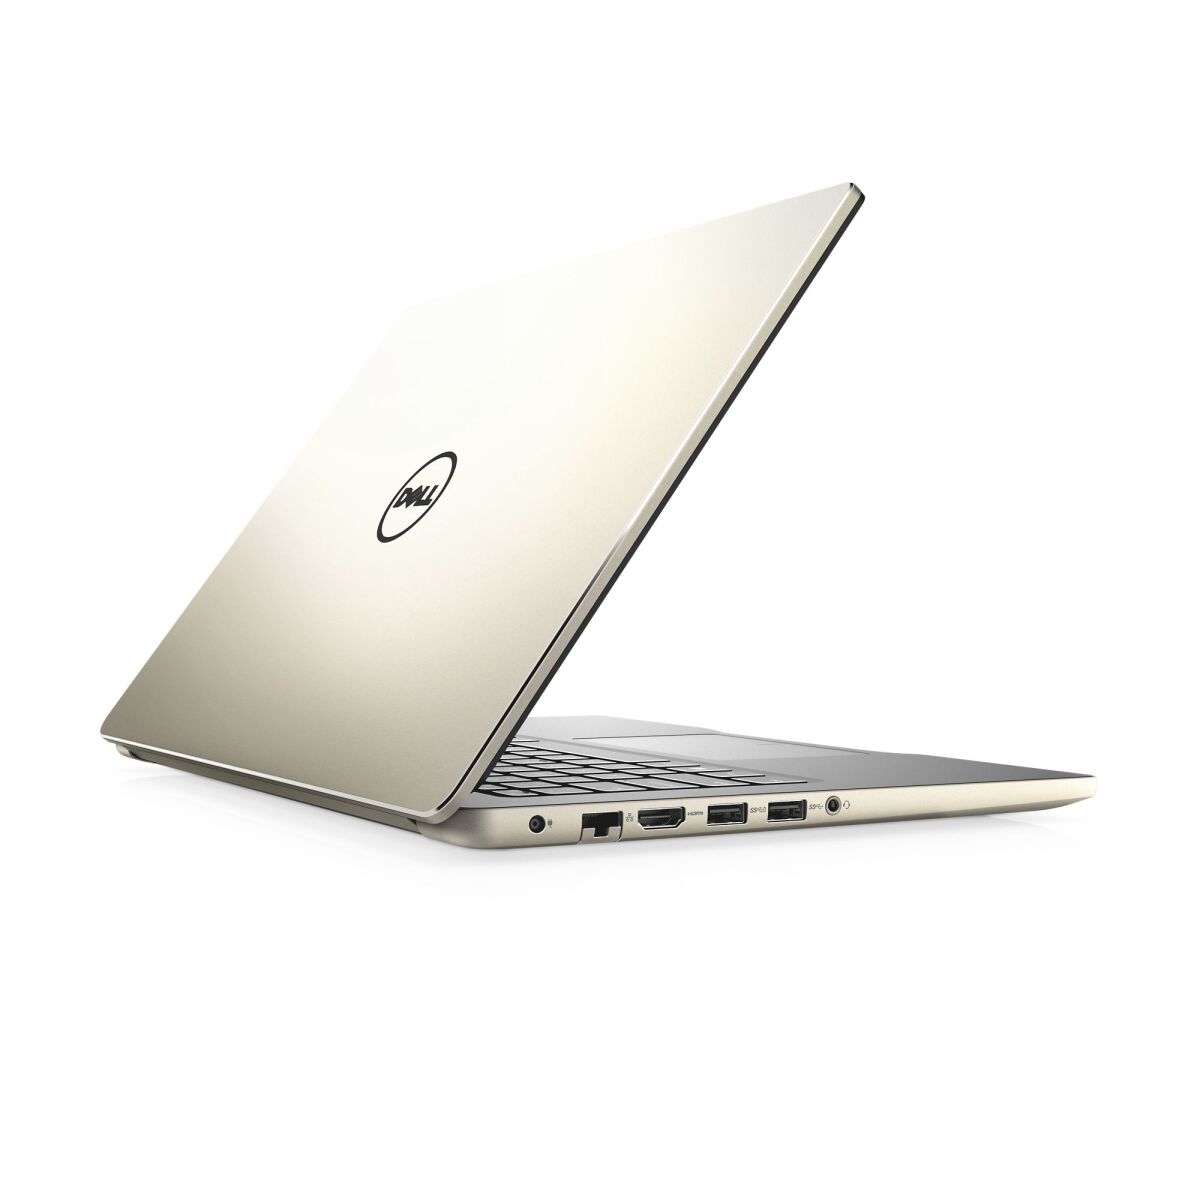 DELL Inspiron 7460 - 338KP1 laptop specifications